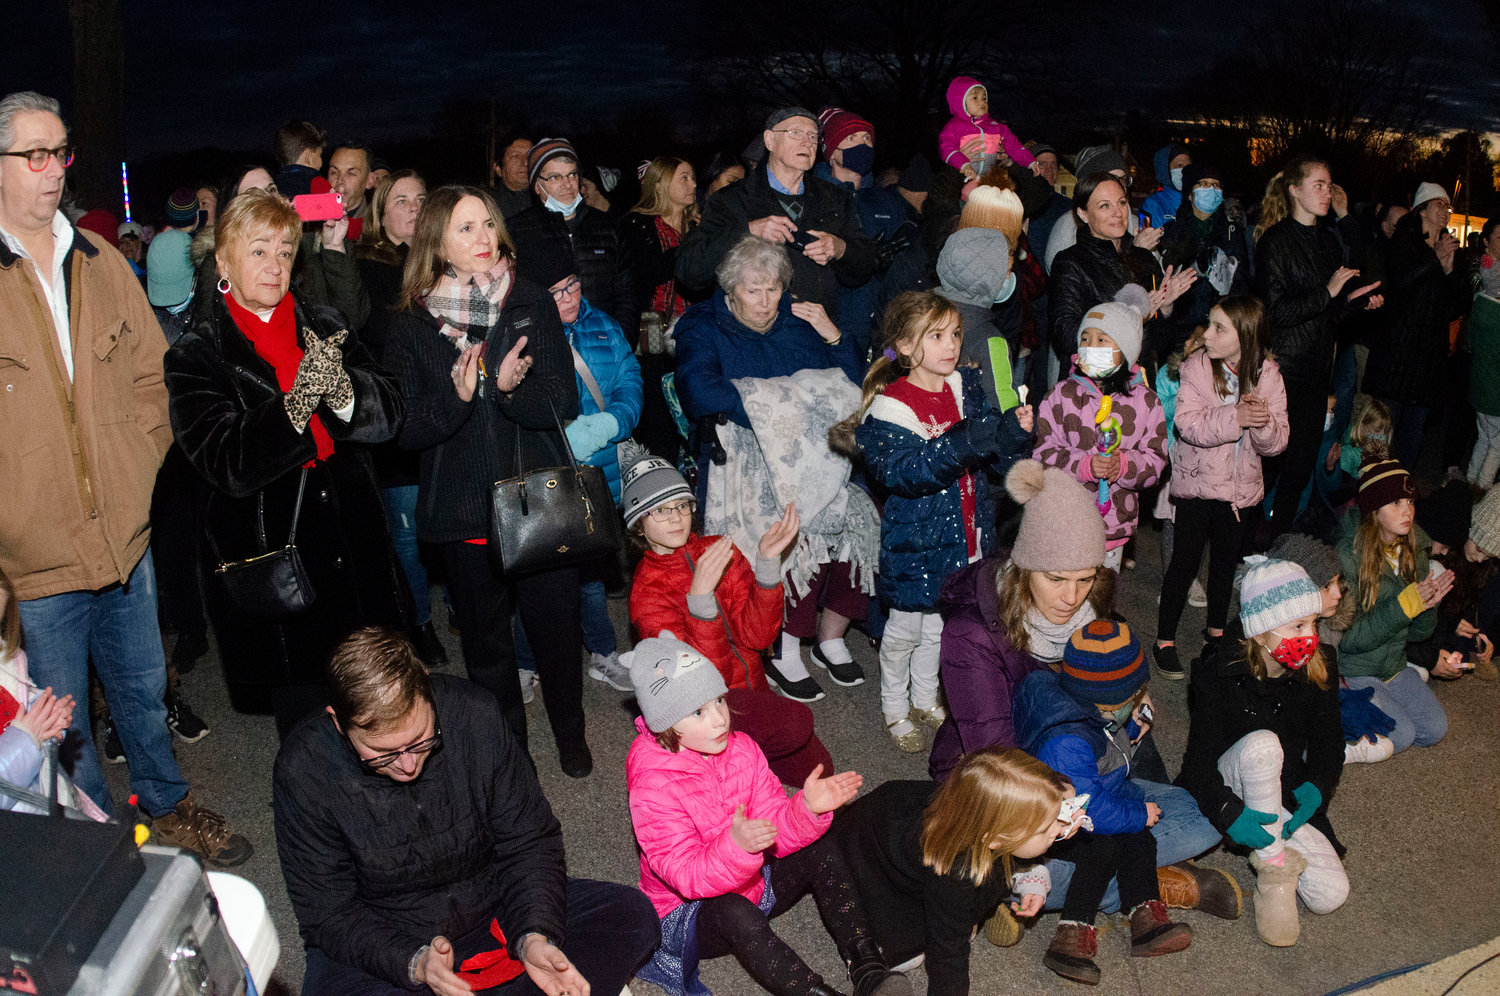 A large crowd attended last year’s tree lighting event at the Barrington Town Hall. This year’s festivities will include games, musical presentations and a special visit from Santa Claus.